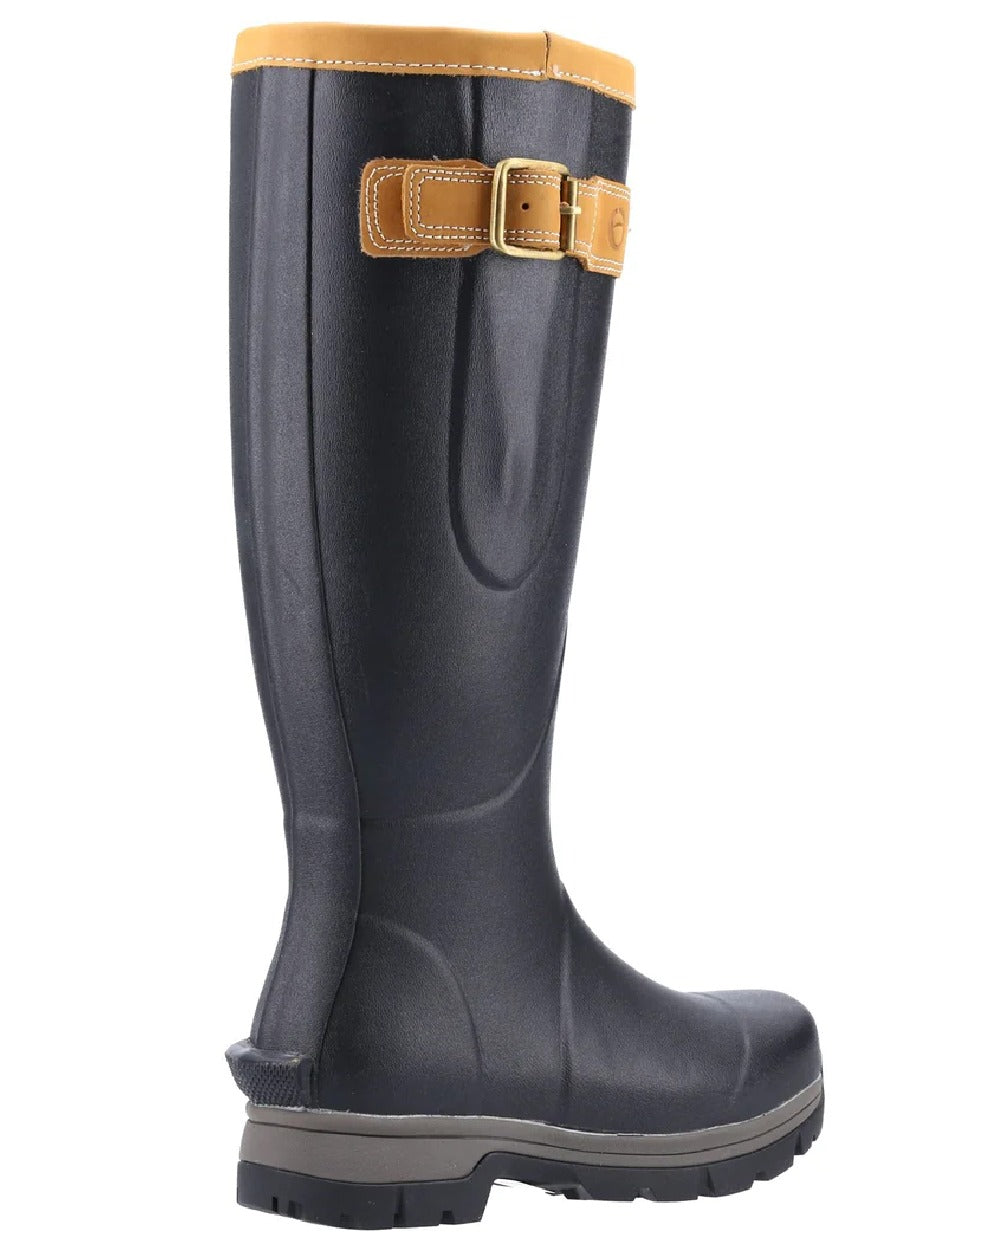 Cotswold Stratus Wellington Boots in Black 